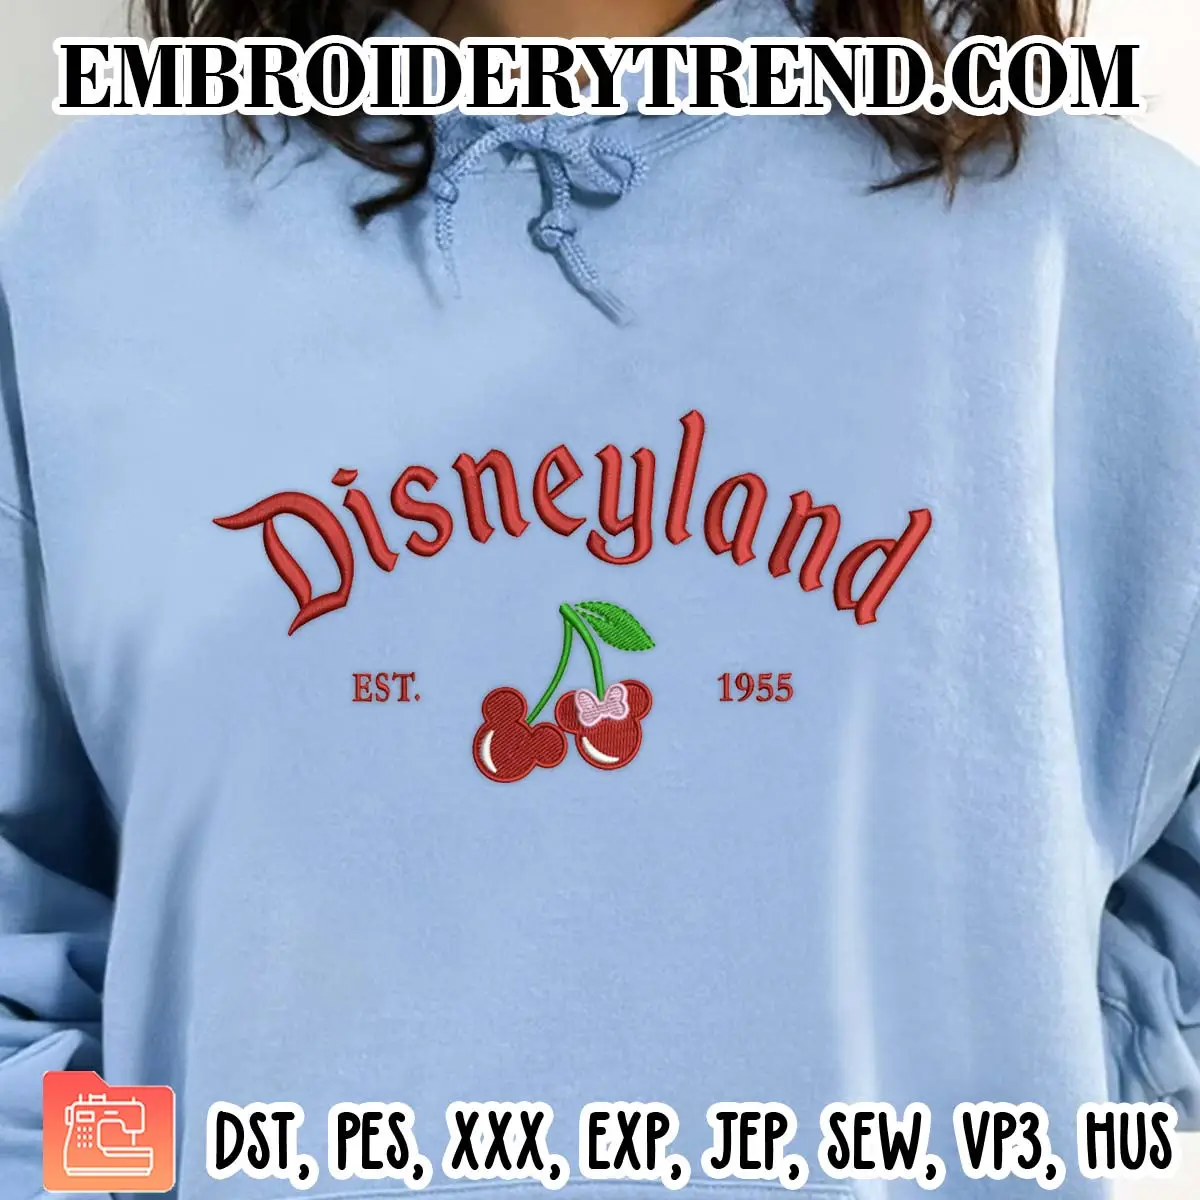 Cherry Mouse Disneyland Est 1955 Embroidery Design, Mouse Ears Cherry Machine Embroidery Digitized Pes Files